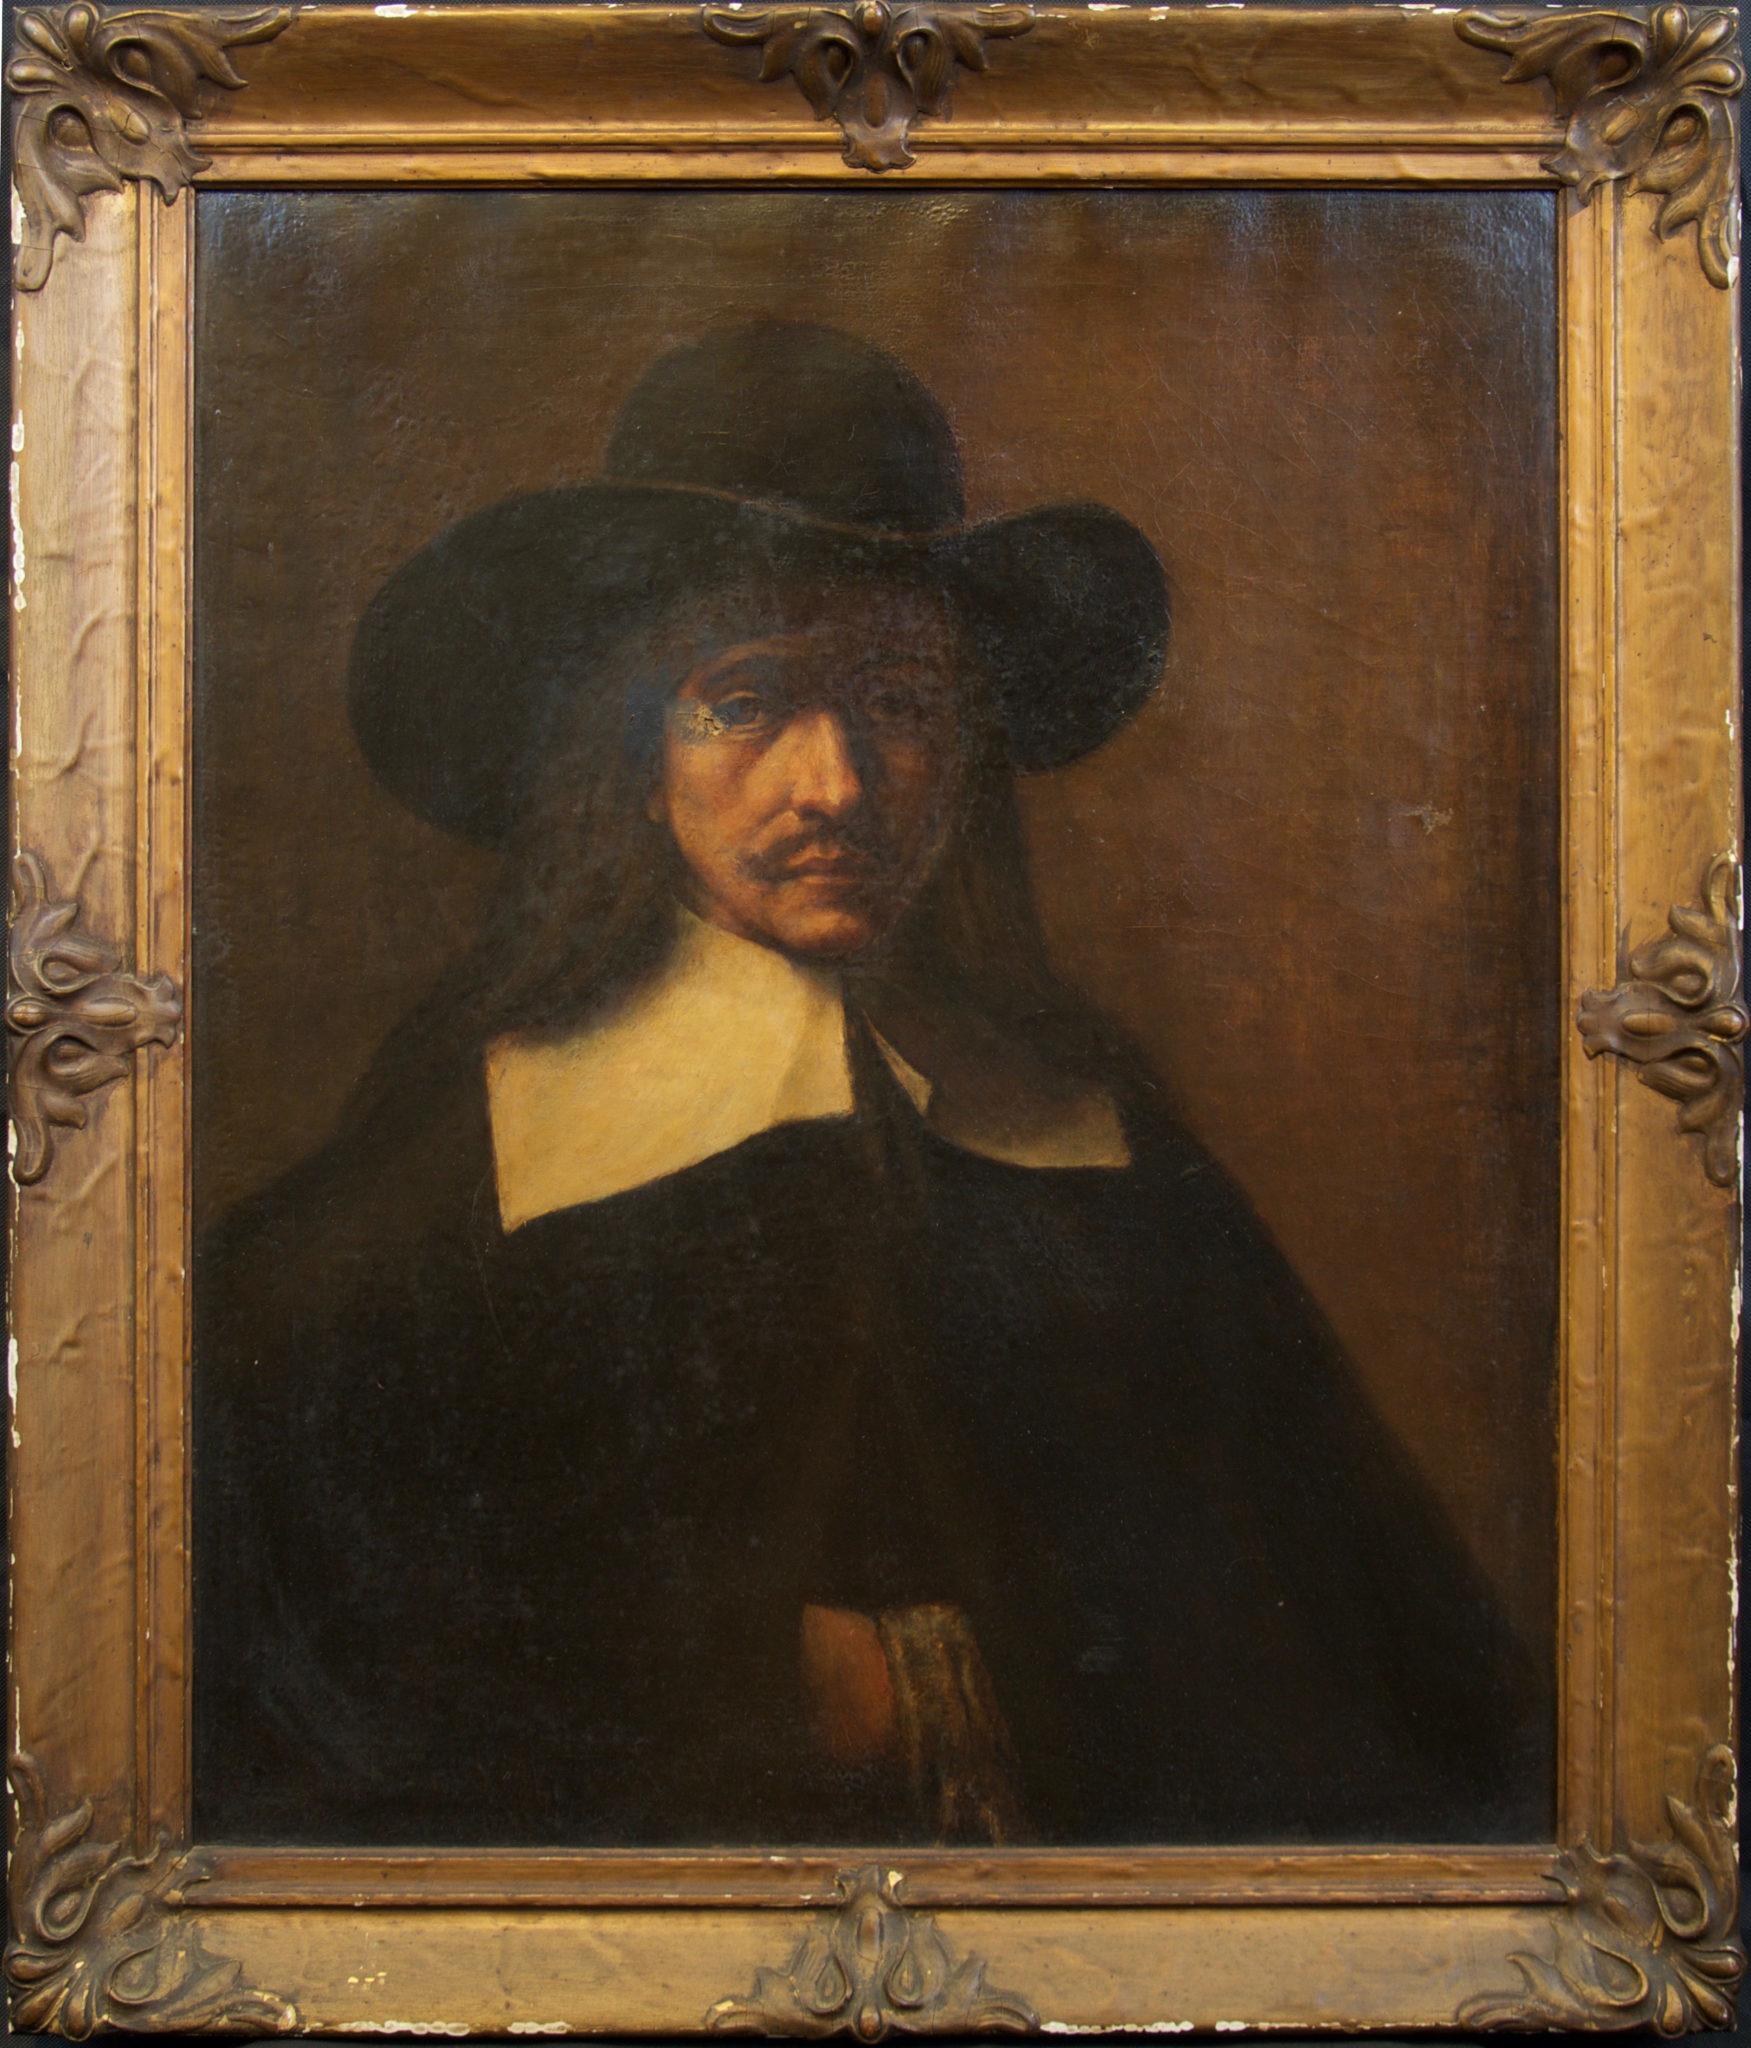 Unknown Portrait Painting - 19th Century Portrait, oil painting in the style of Rembrandt